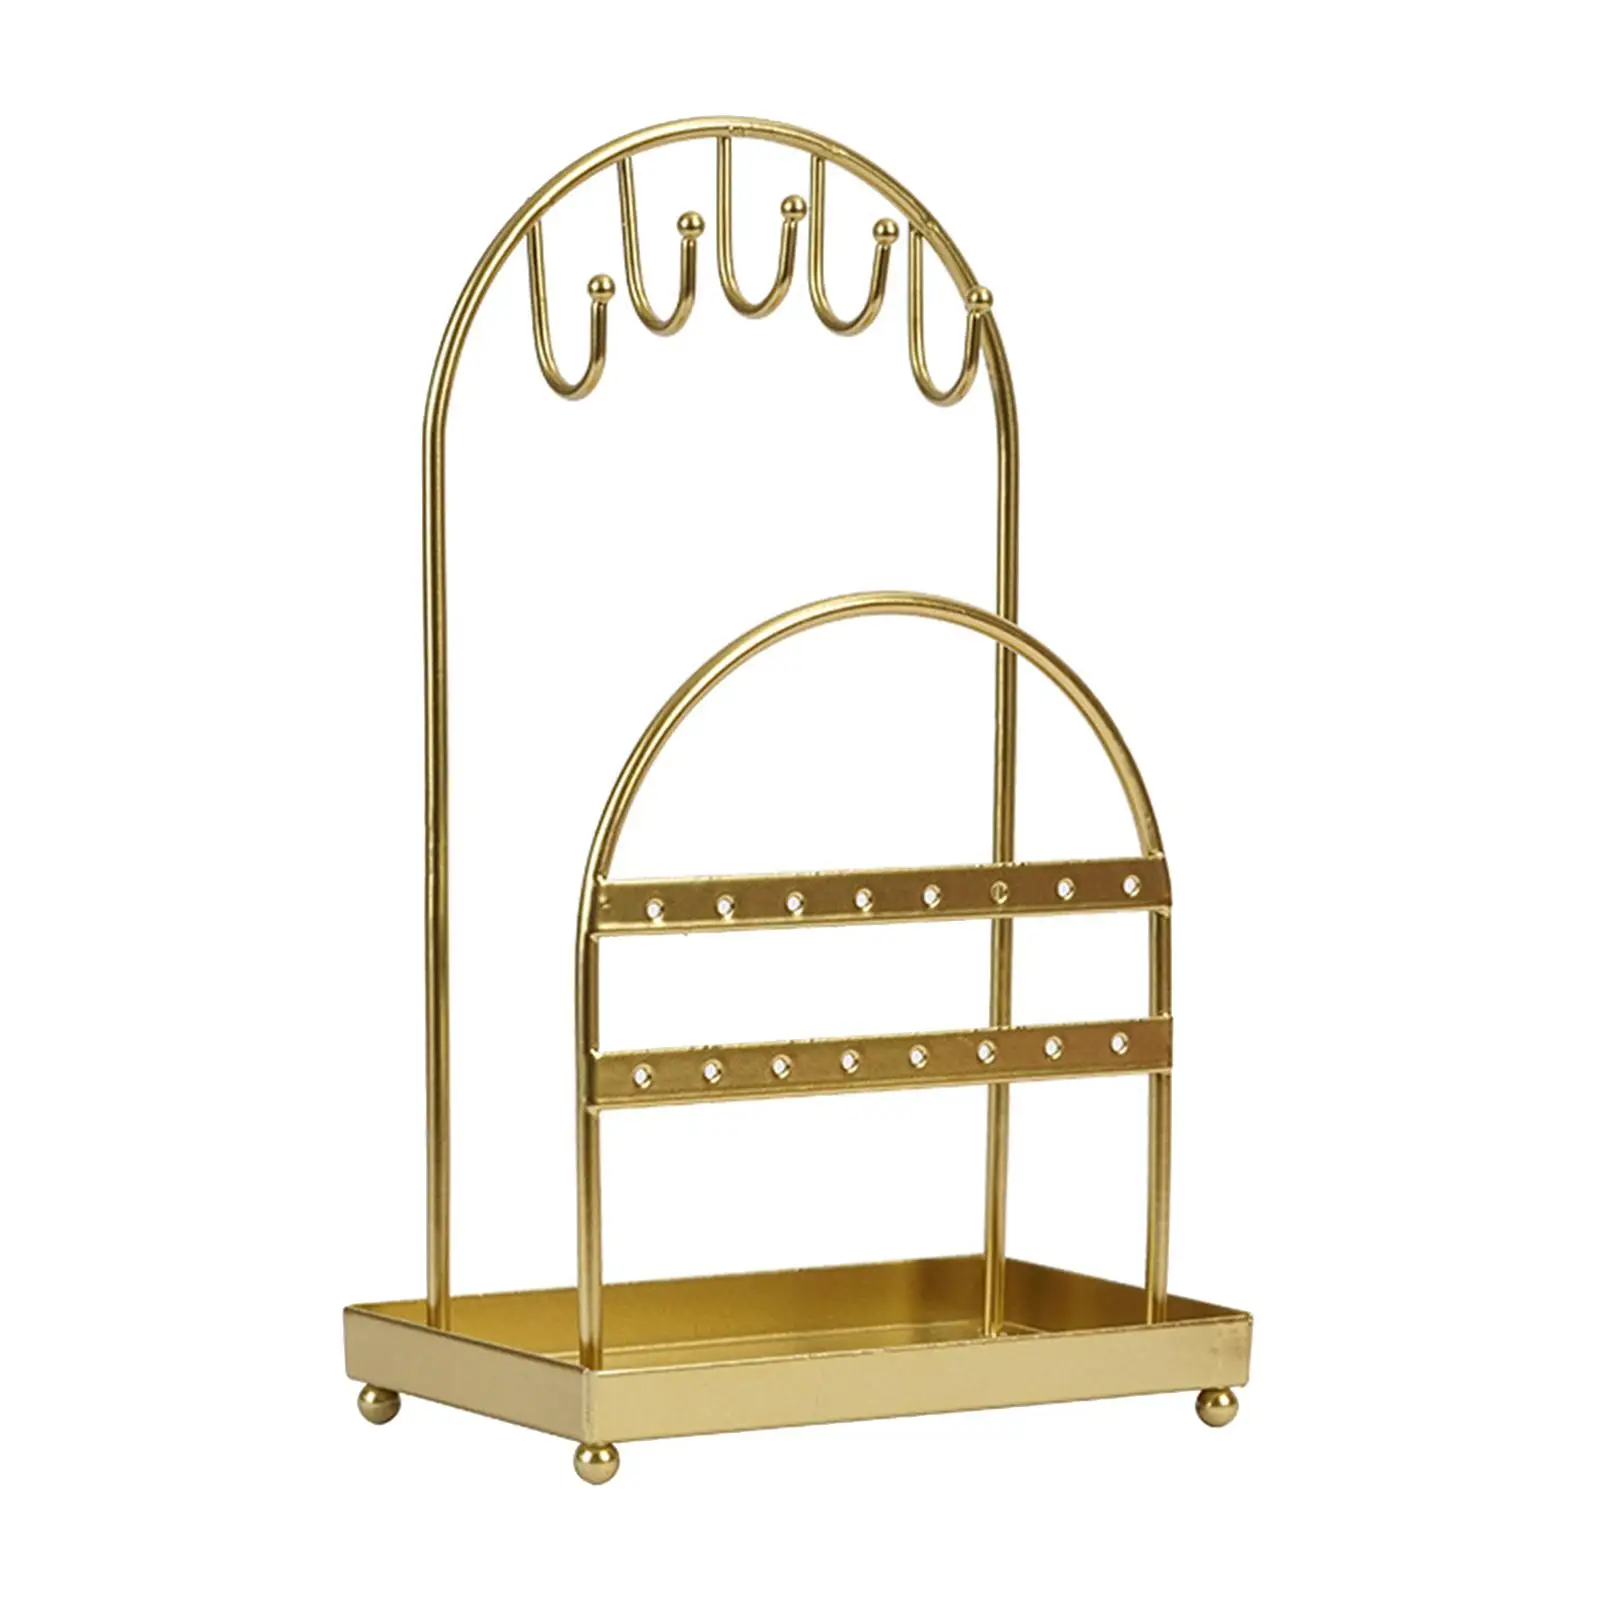 Jewelry Jewelry Display Stand Jewelry Holder Home Rings Earring Storage Metal Tabletop Jewelry Display Rack Necklaces Hanger